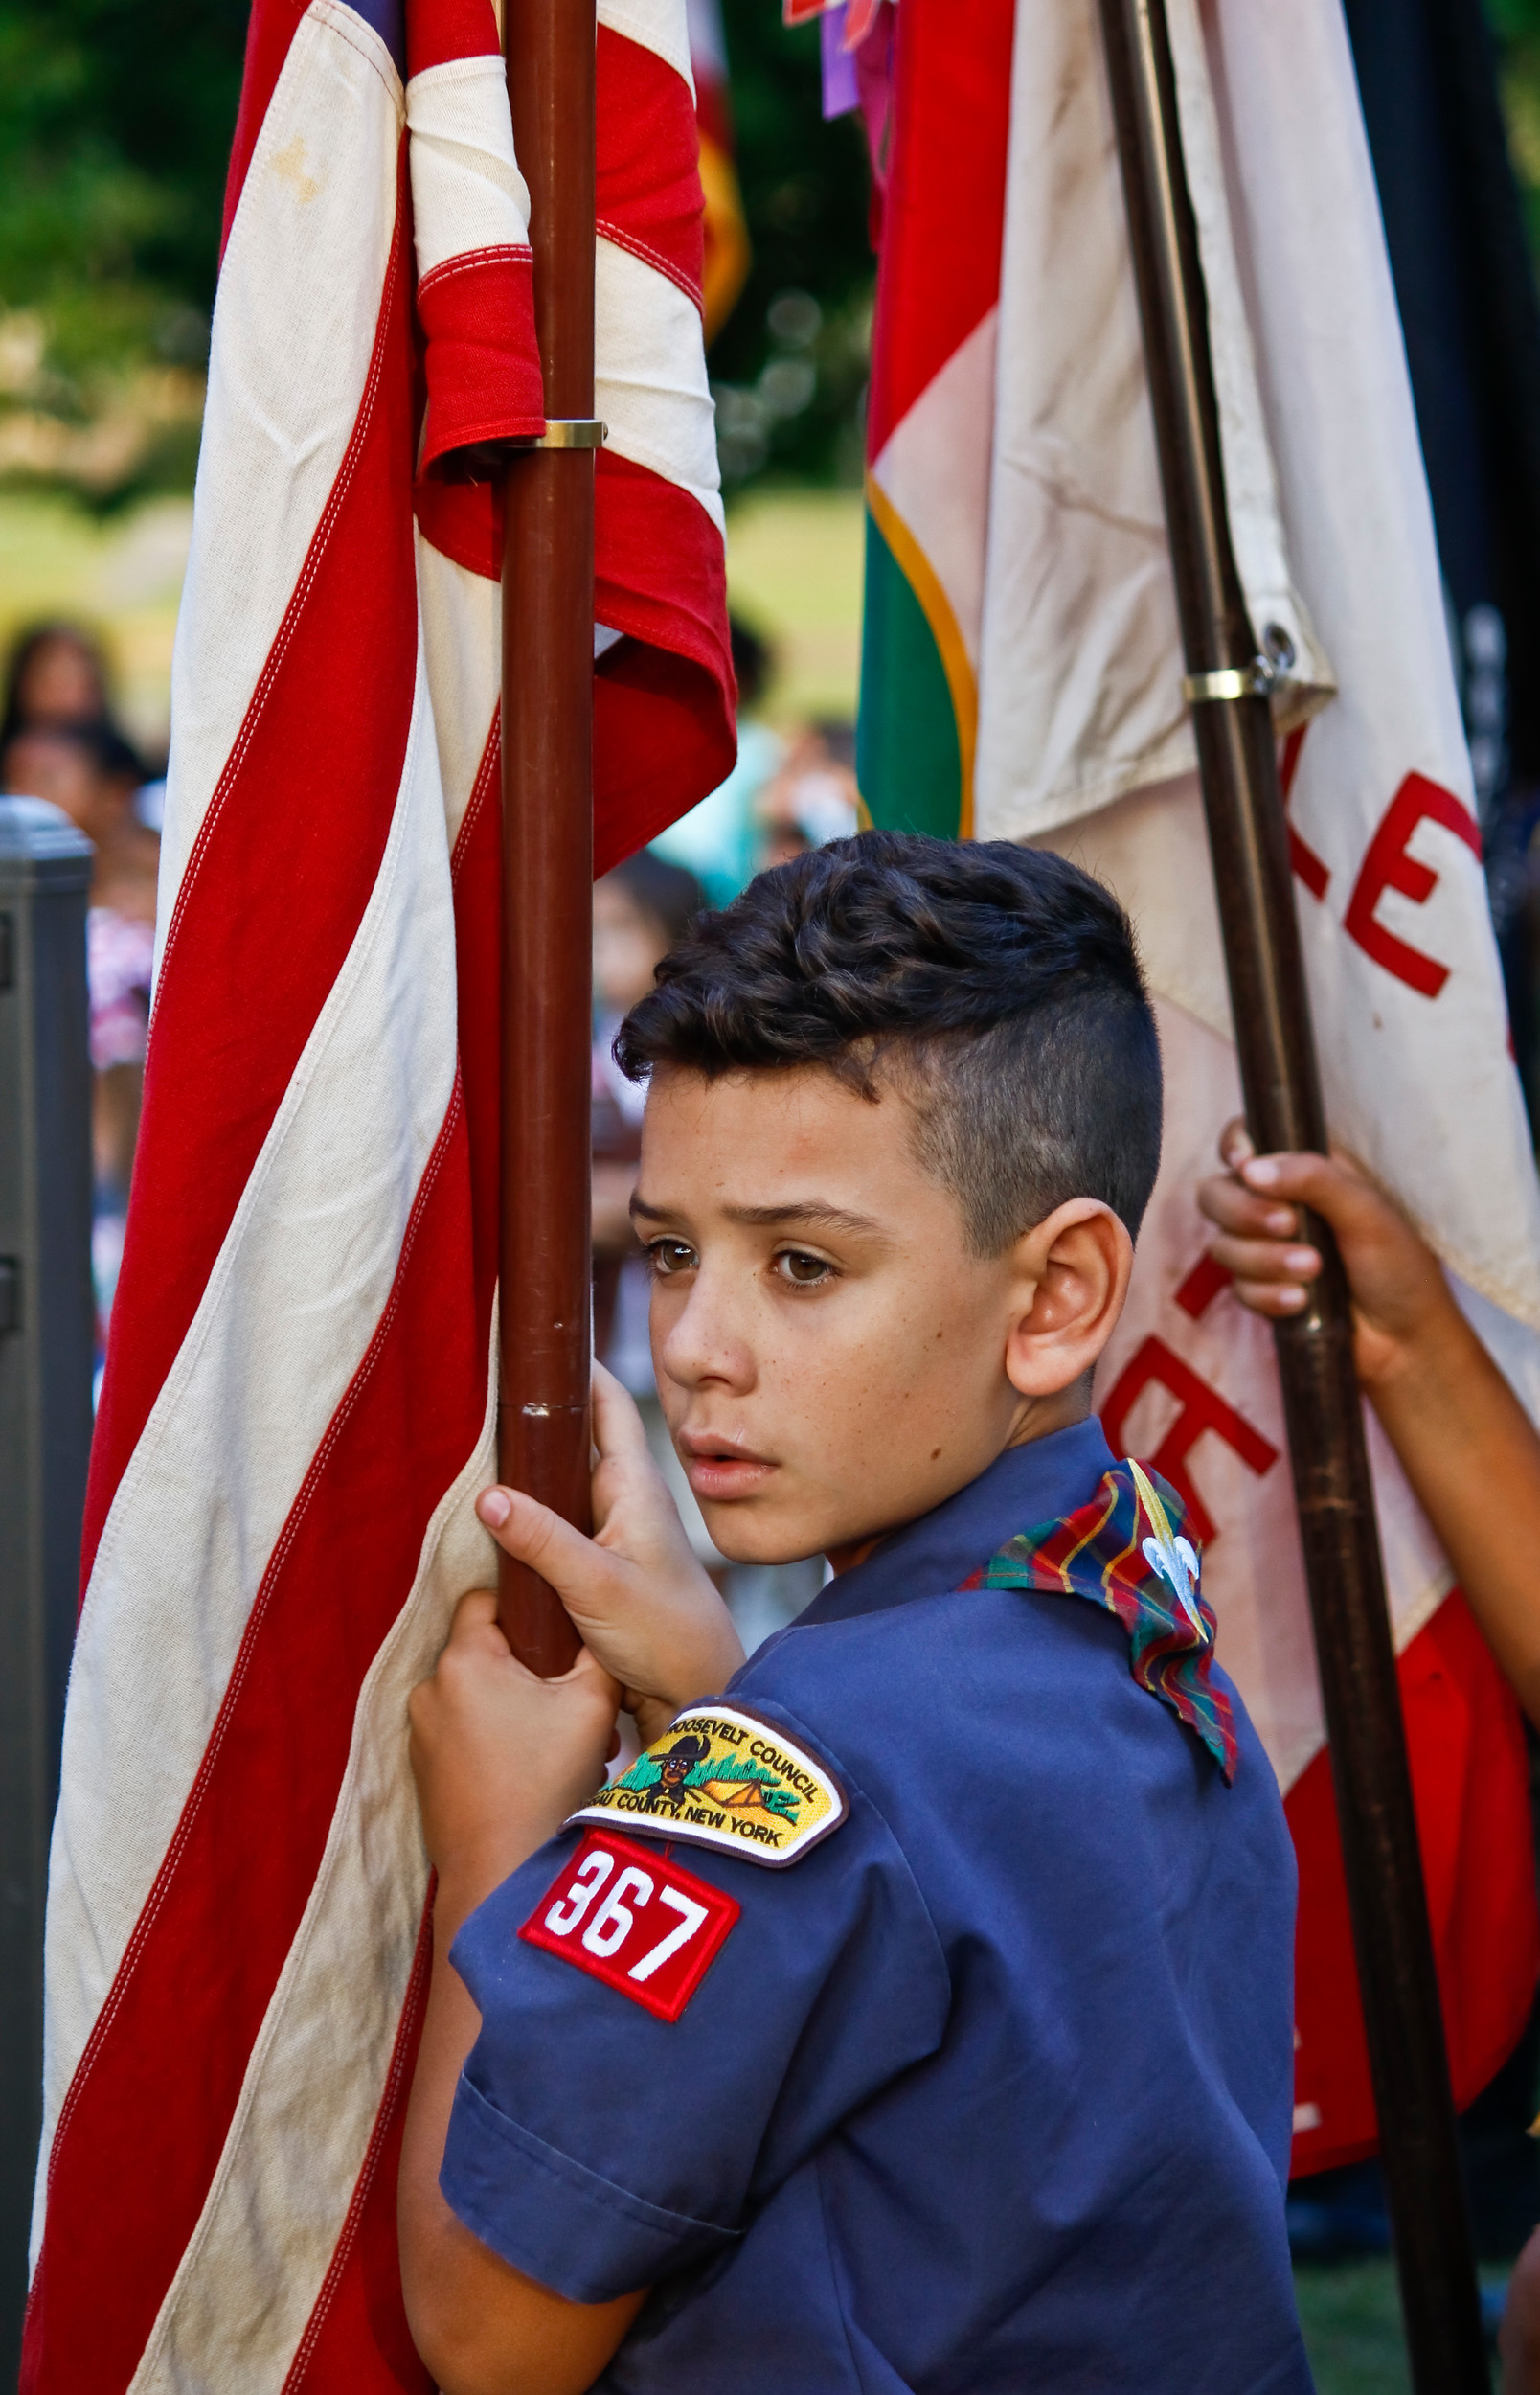 Joining the American Legion, VFW, Girl Scouts and other Boy Scouts, 10 year old Logan Thomson carried the American flag during the presentation of colors and took up his spot as the groups surrounded the memorial at Hendrickson Park.